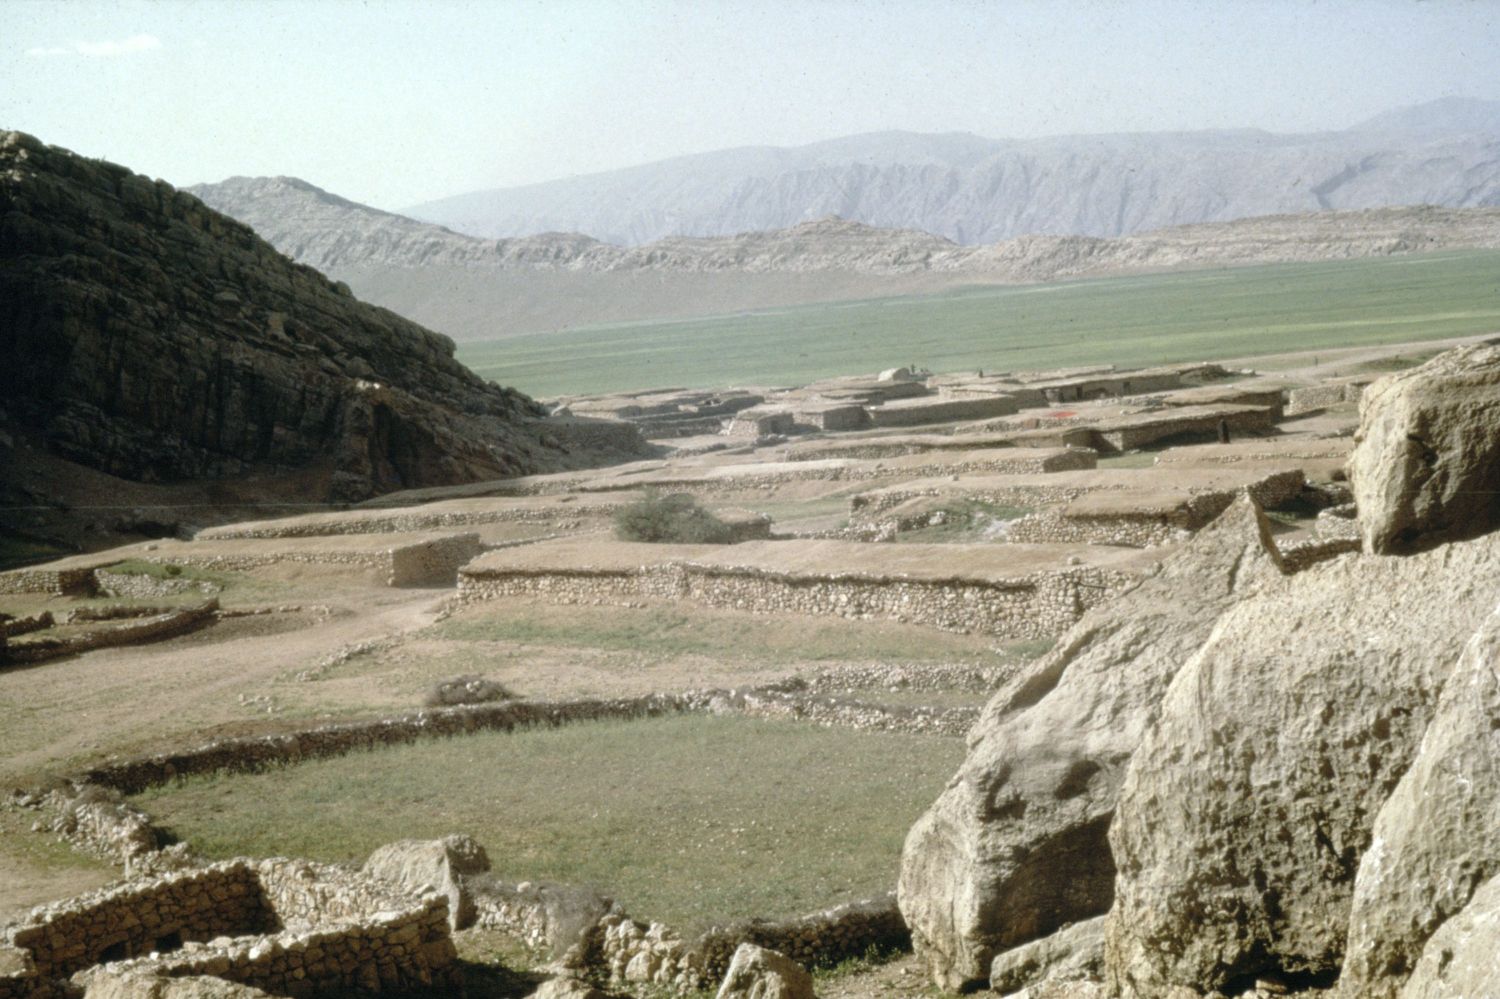 General view of archaeological site.